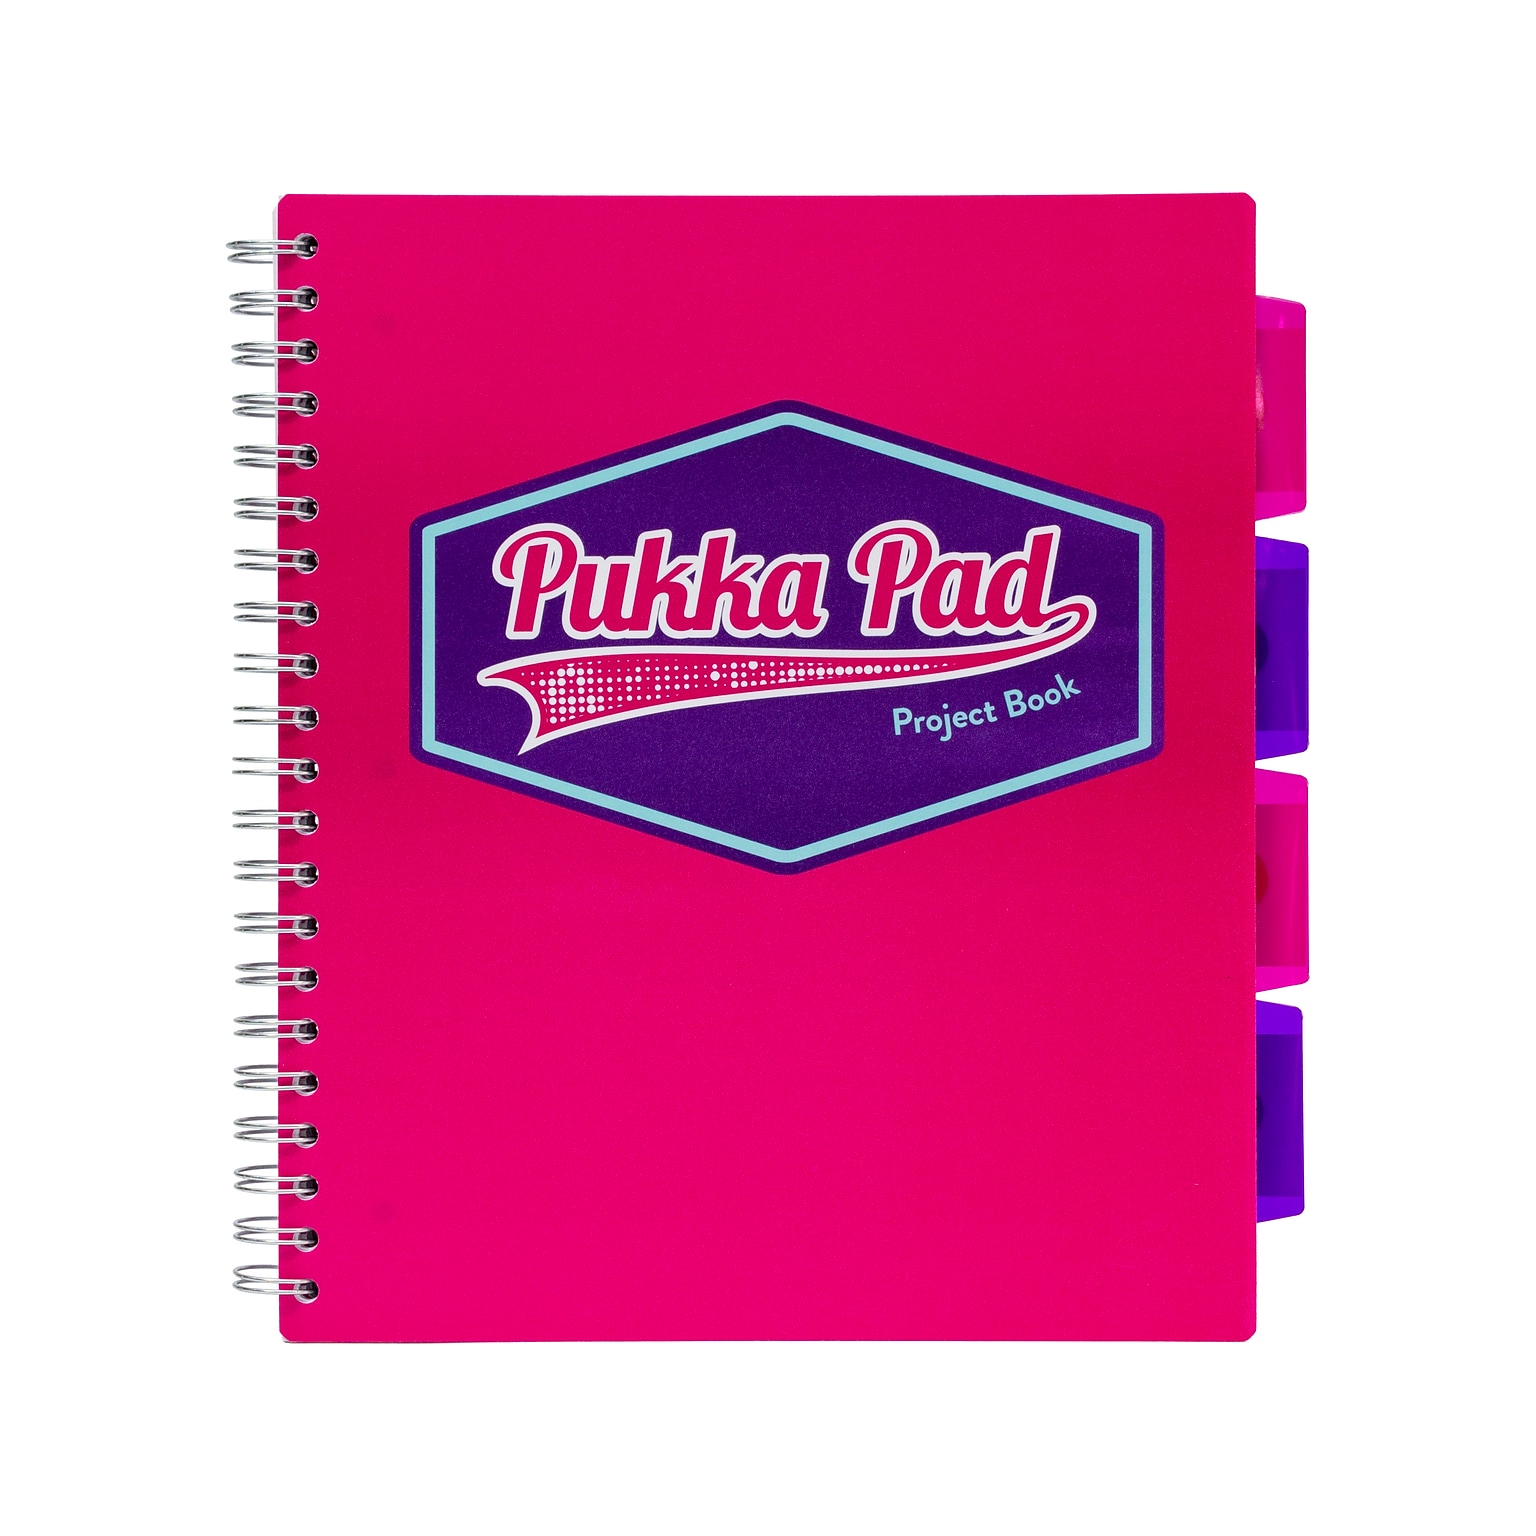 Pukka Pad Vision 5-Subject Notebooks, 8.5 x 11, Ruled, 100 Sheets, Deep Pink, 3/Pack (8866(PK)-VIS)